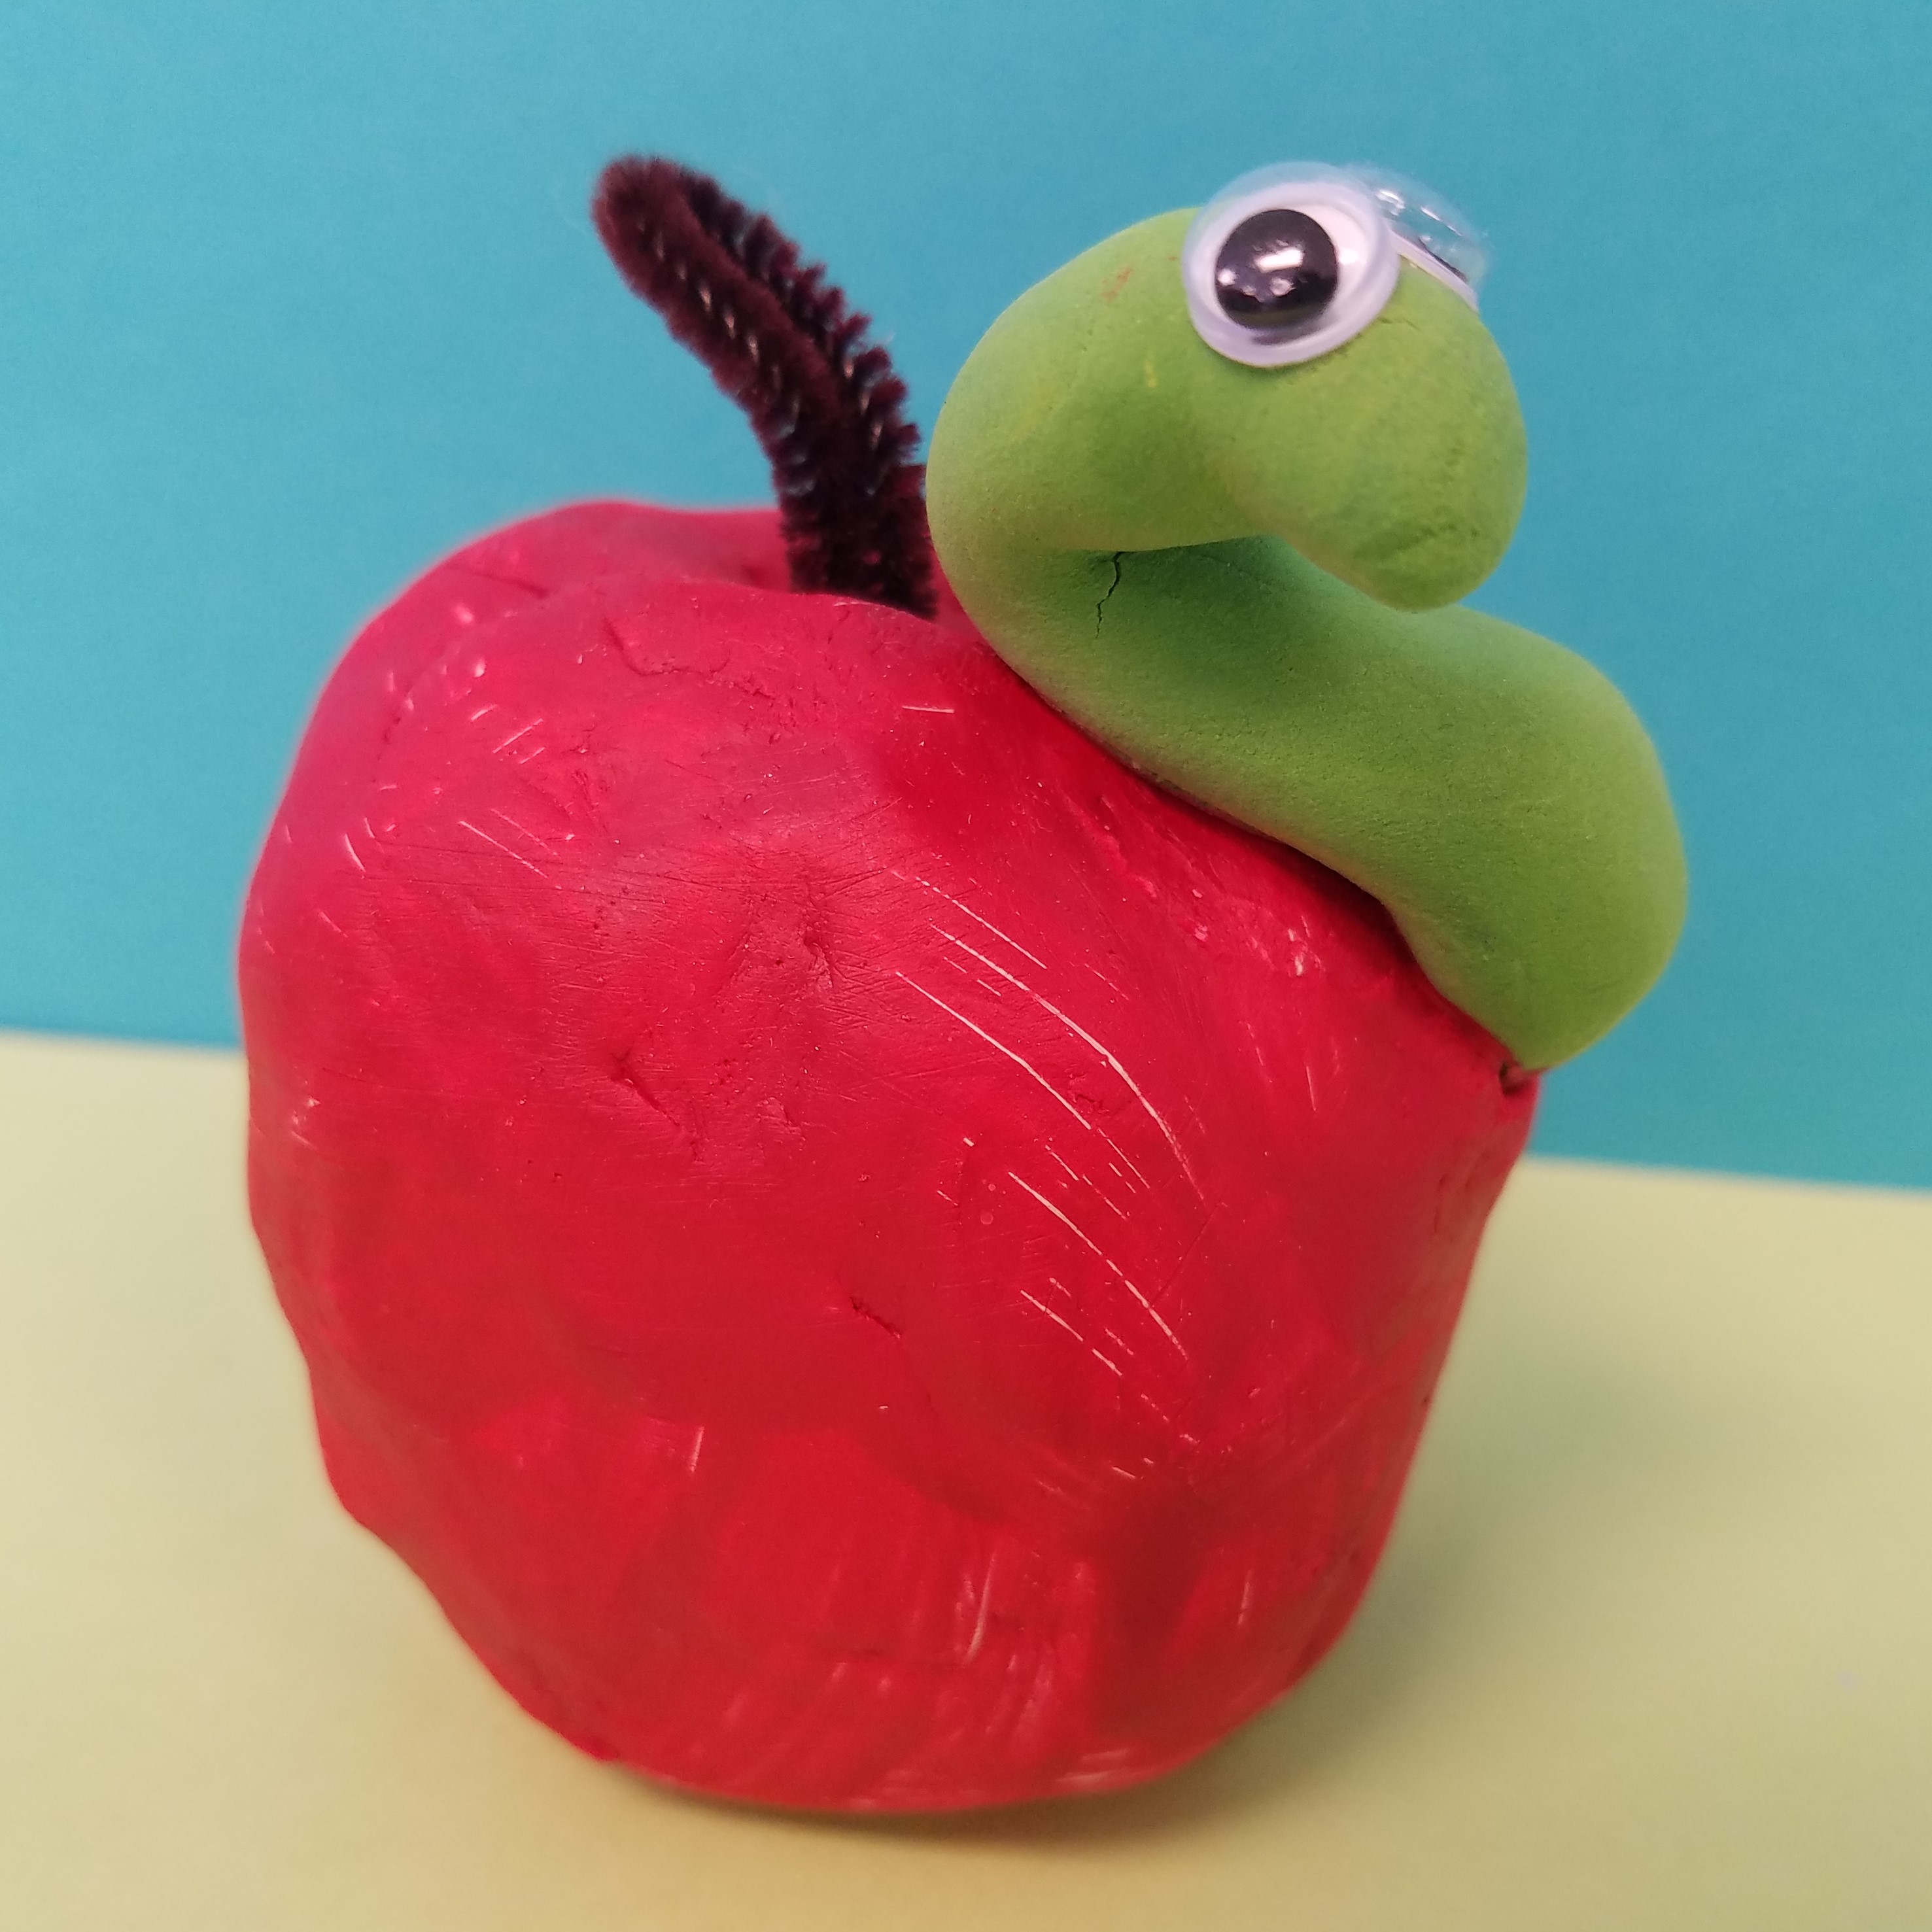 Kidcreate Studio - Fayetteville, Apples and Bananas Art Project